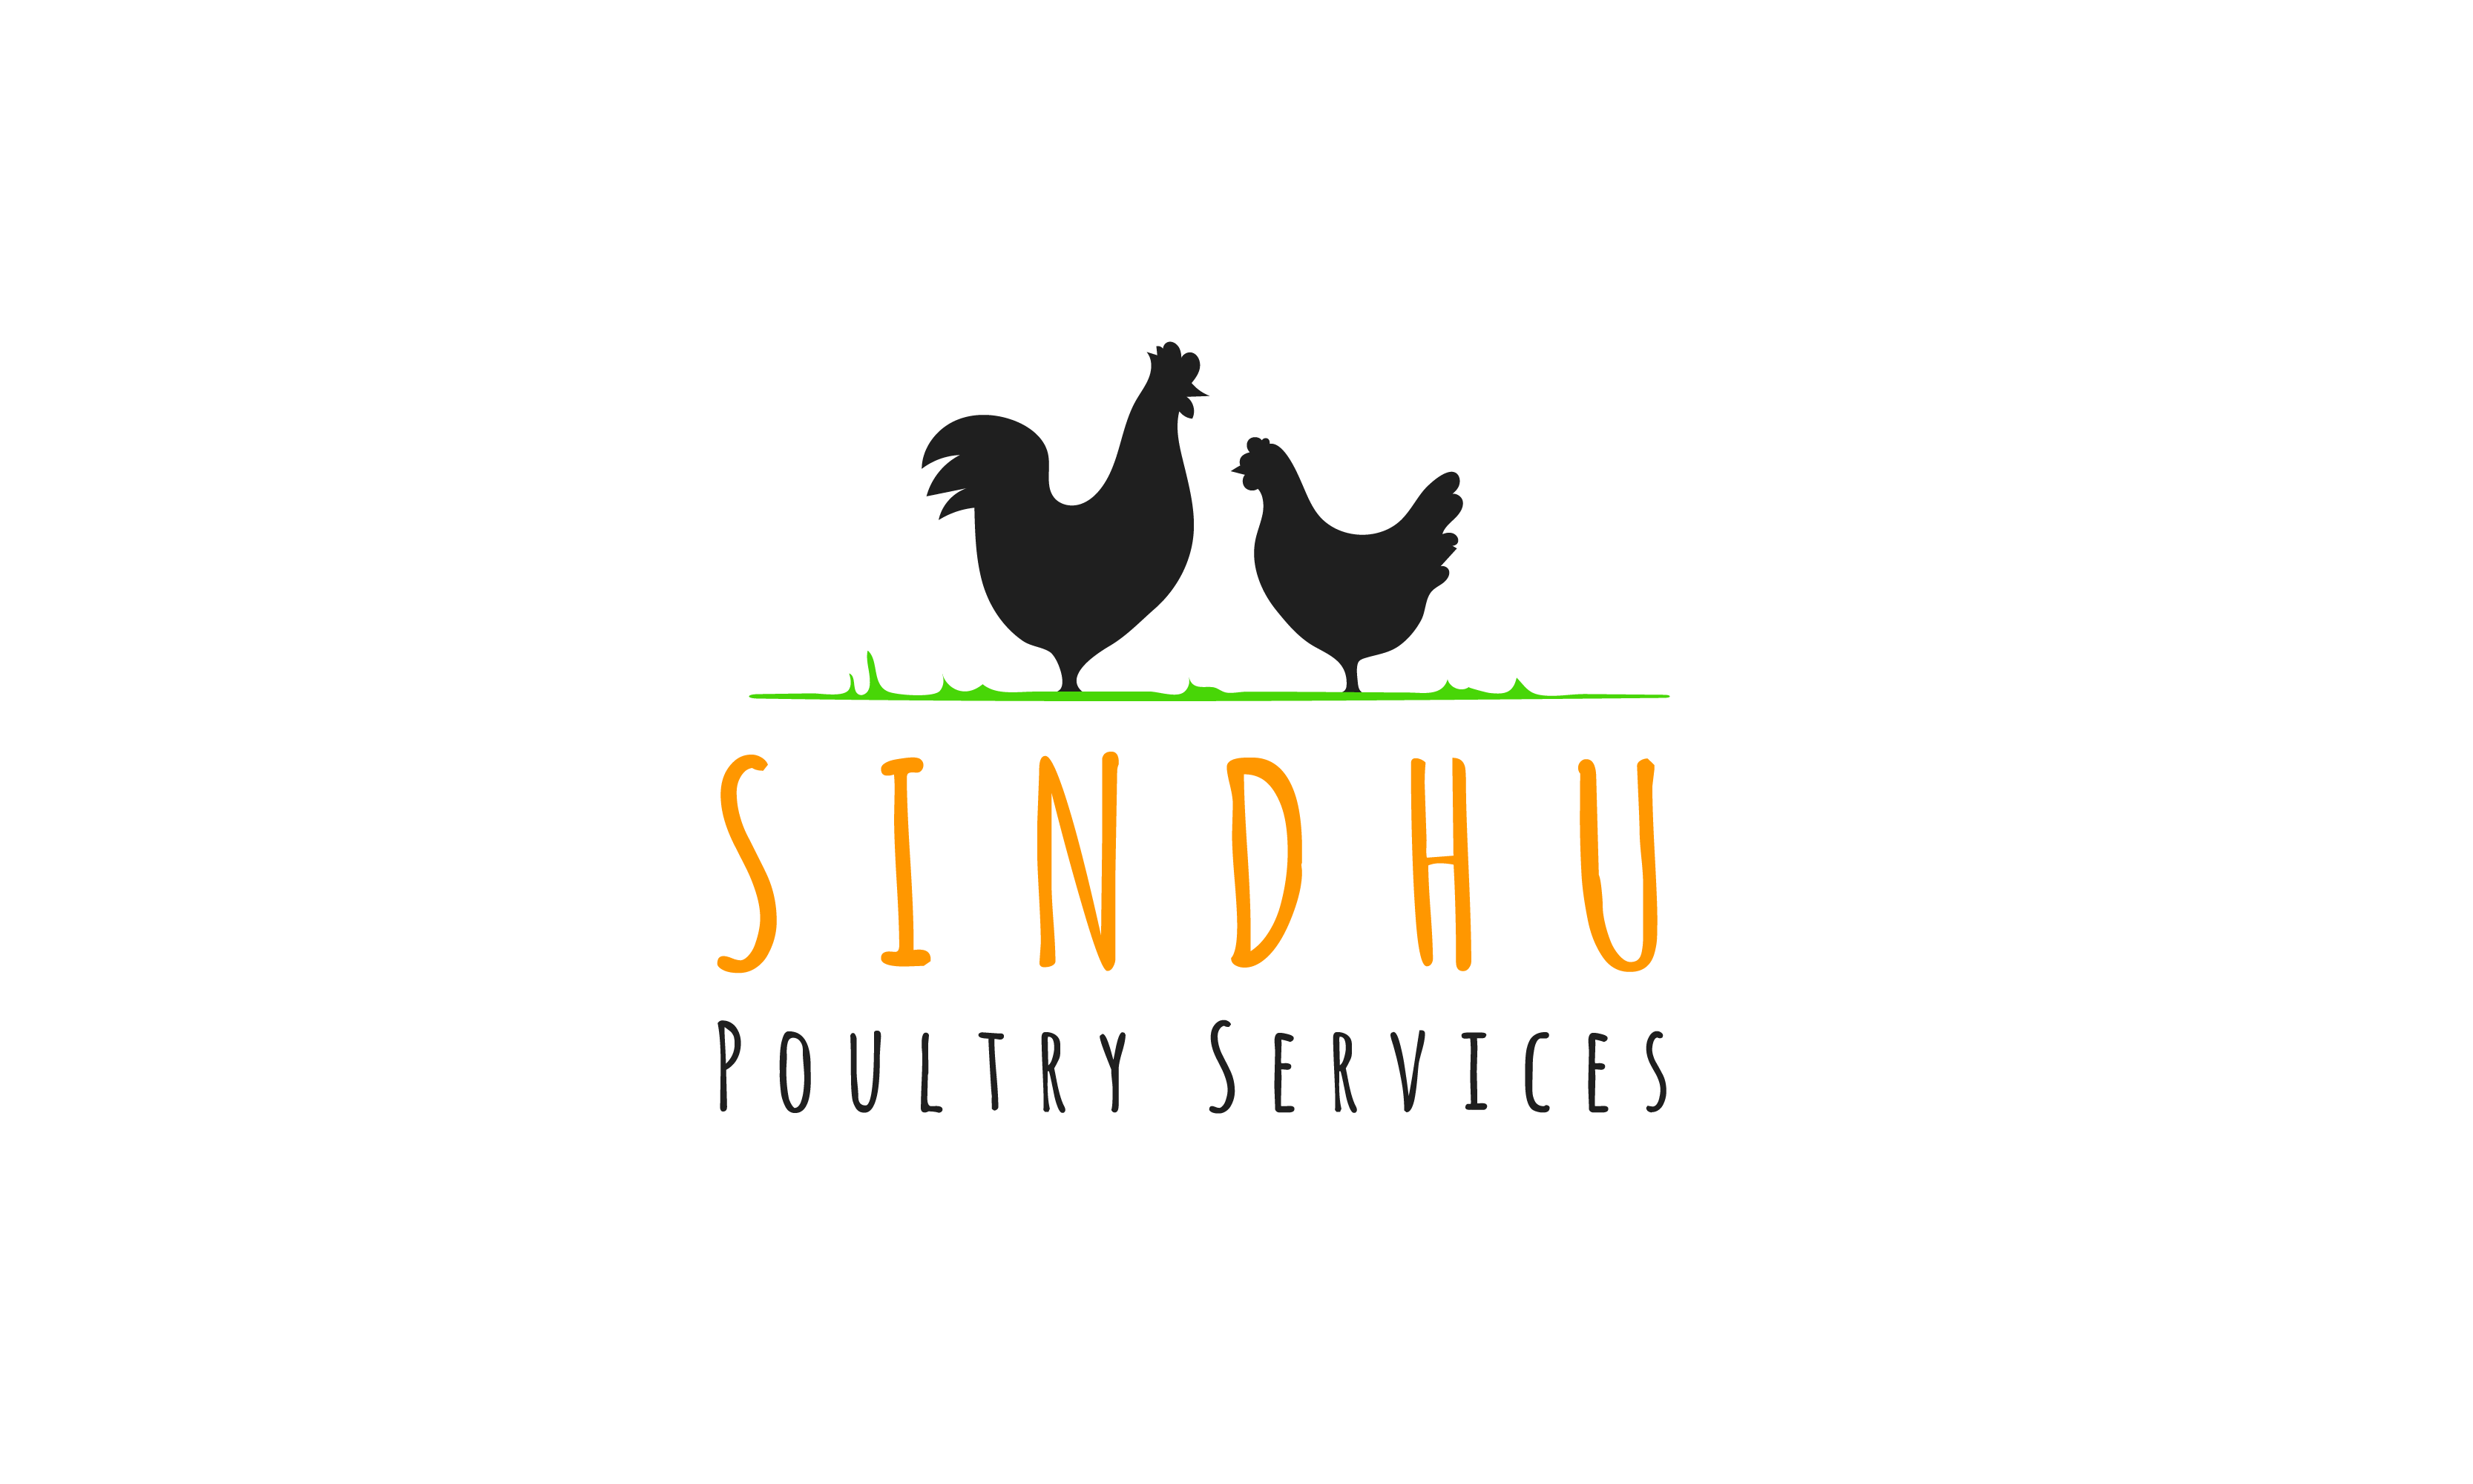 Sindhu Poultry Services